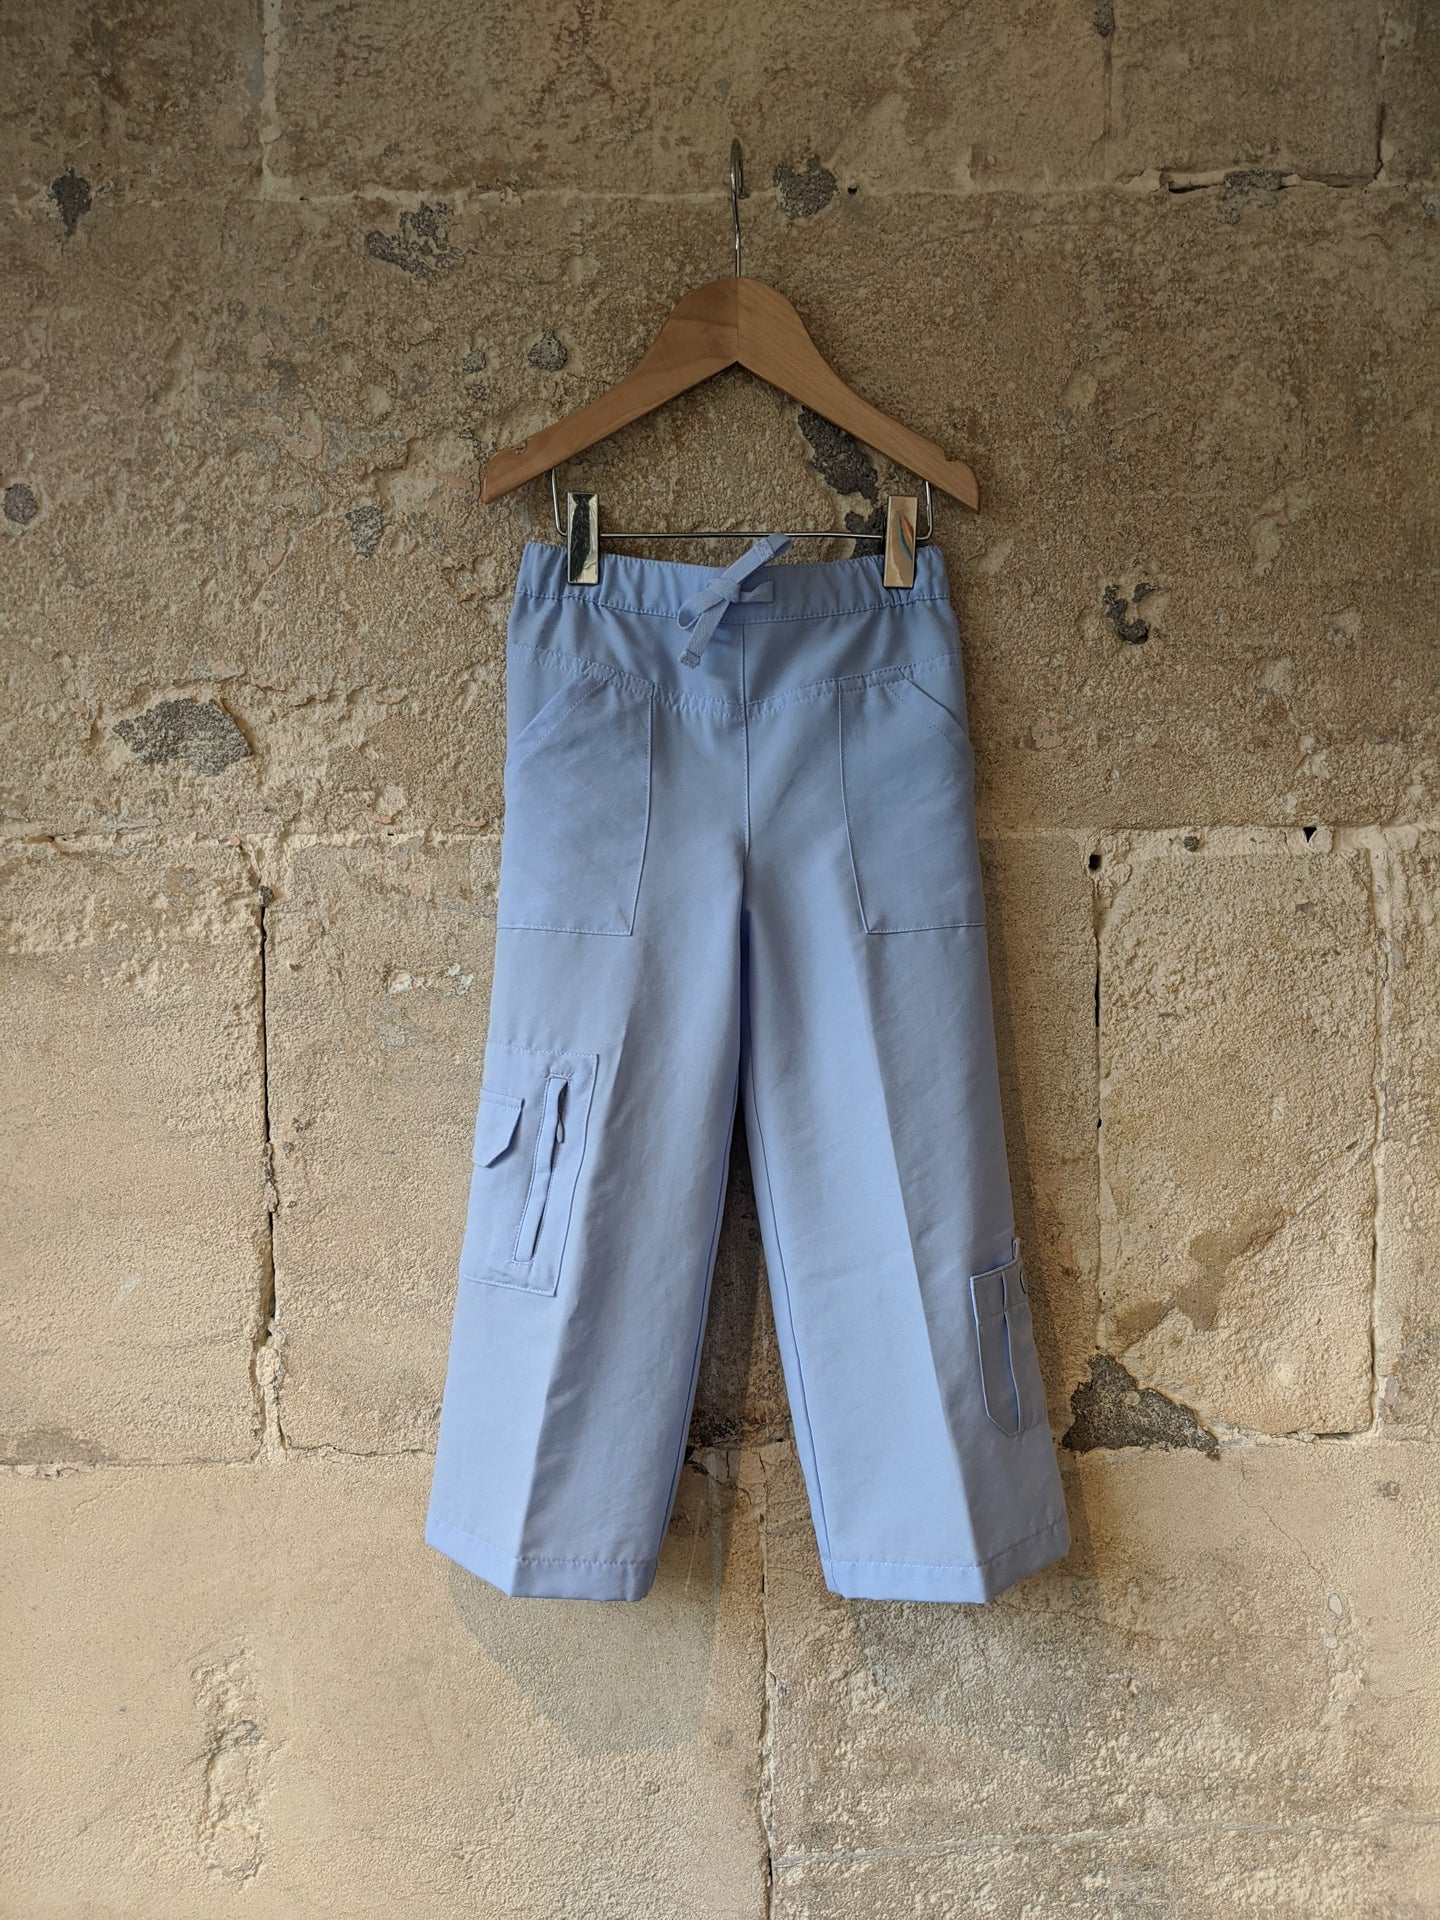 Powder Blue Marks & Spencer Retro Trousers - 2 Years